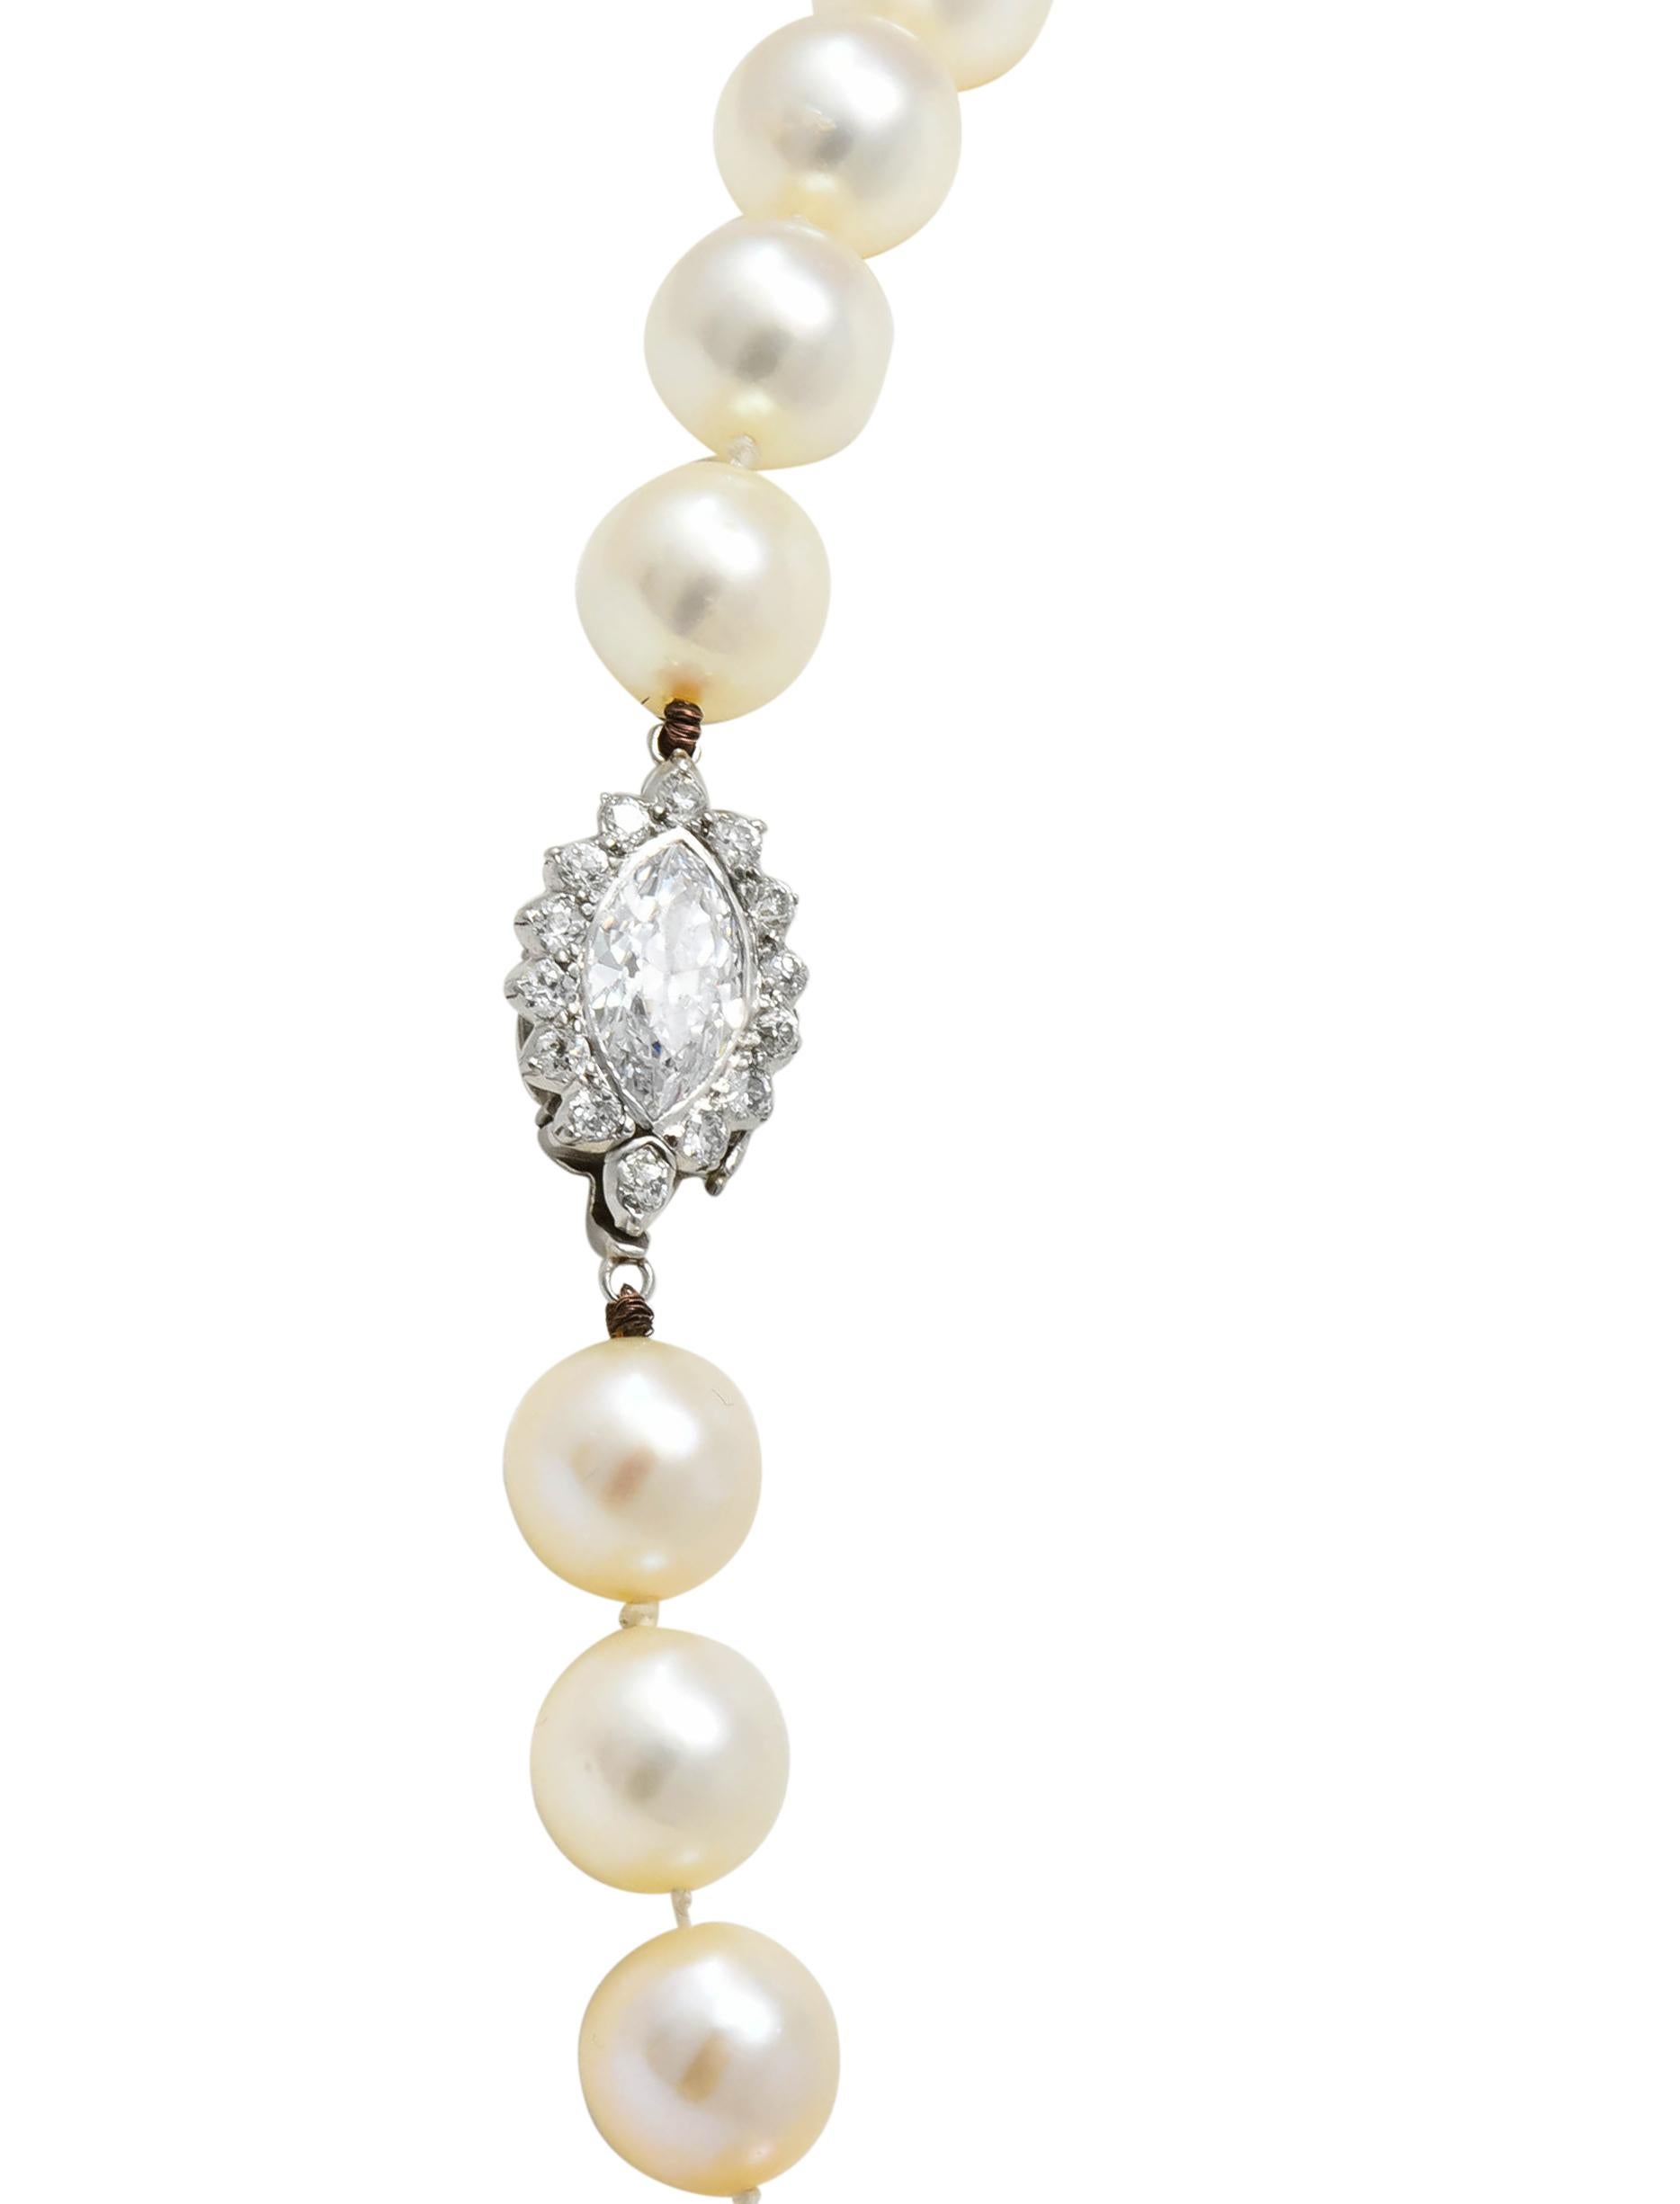 Marquise Cut Cartier 1.31 Carat Diamond Cultured Pearl Platinum Knotted Strand Necklace GIA